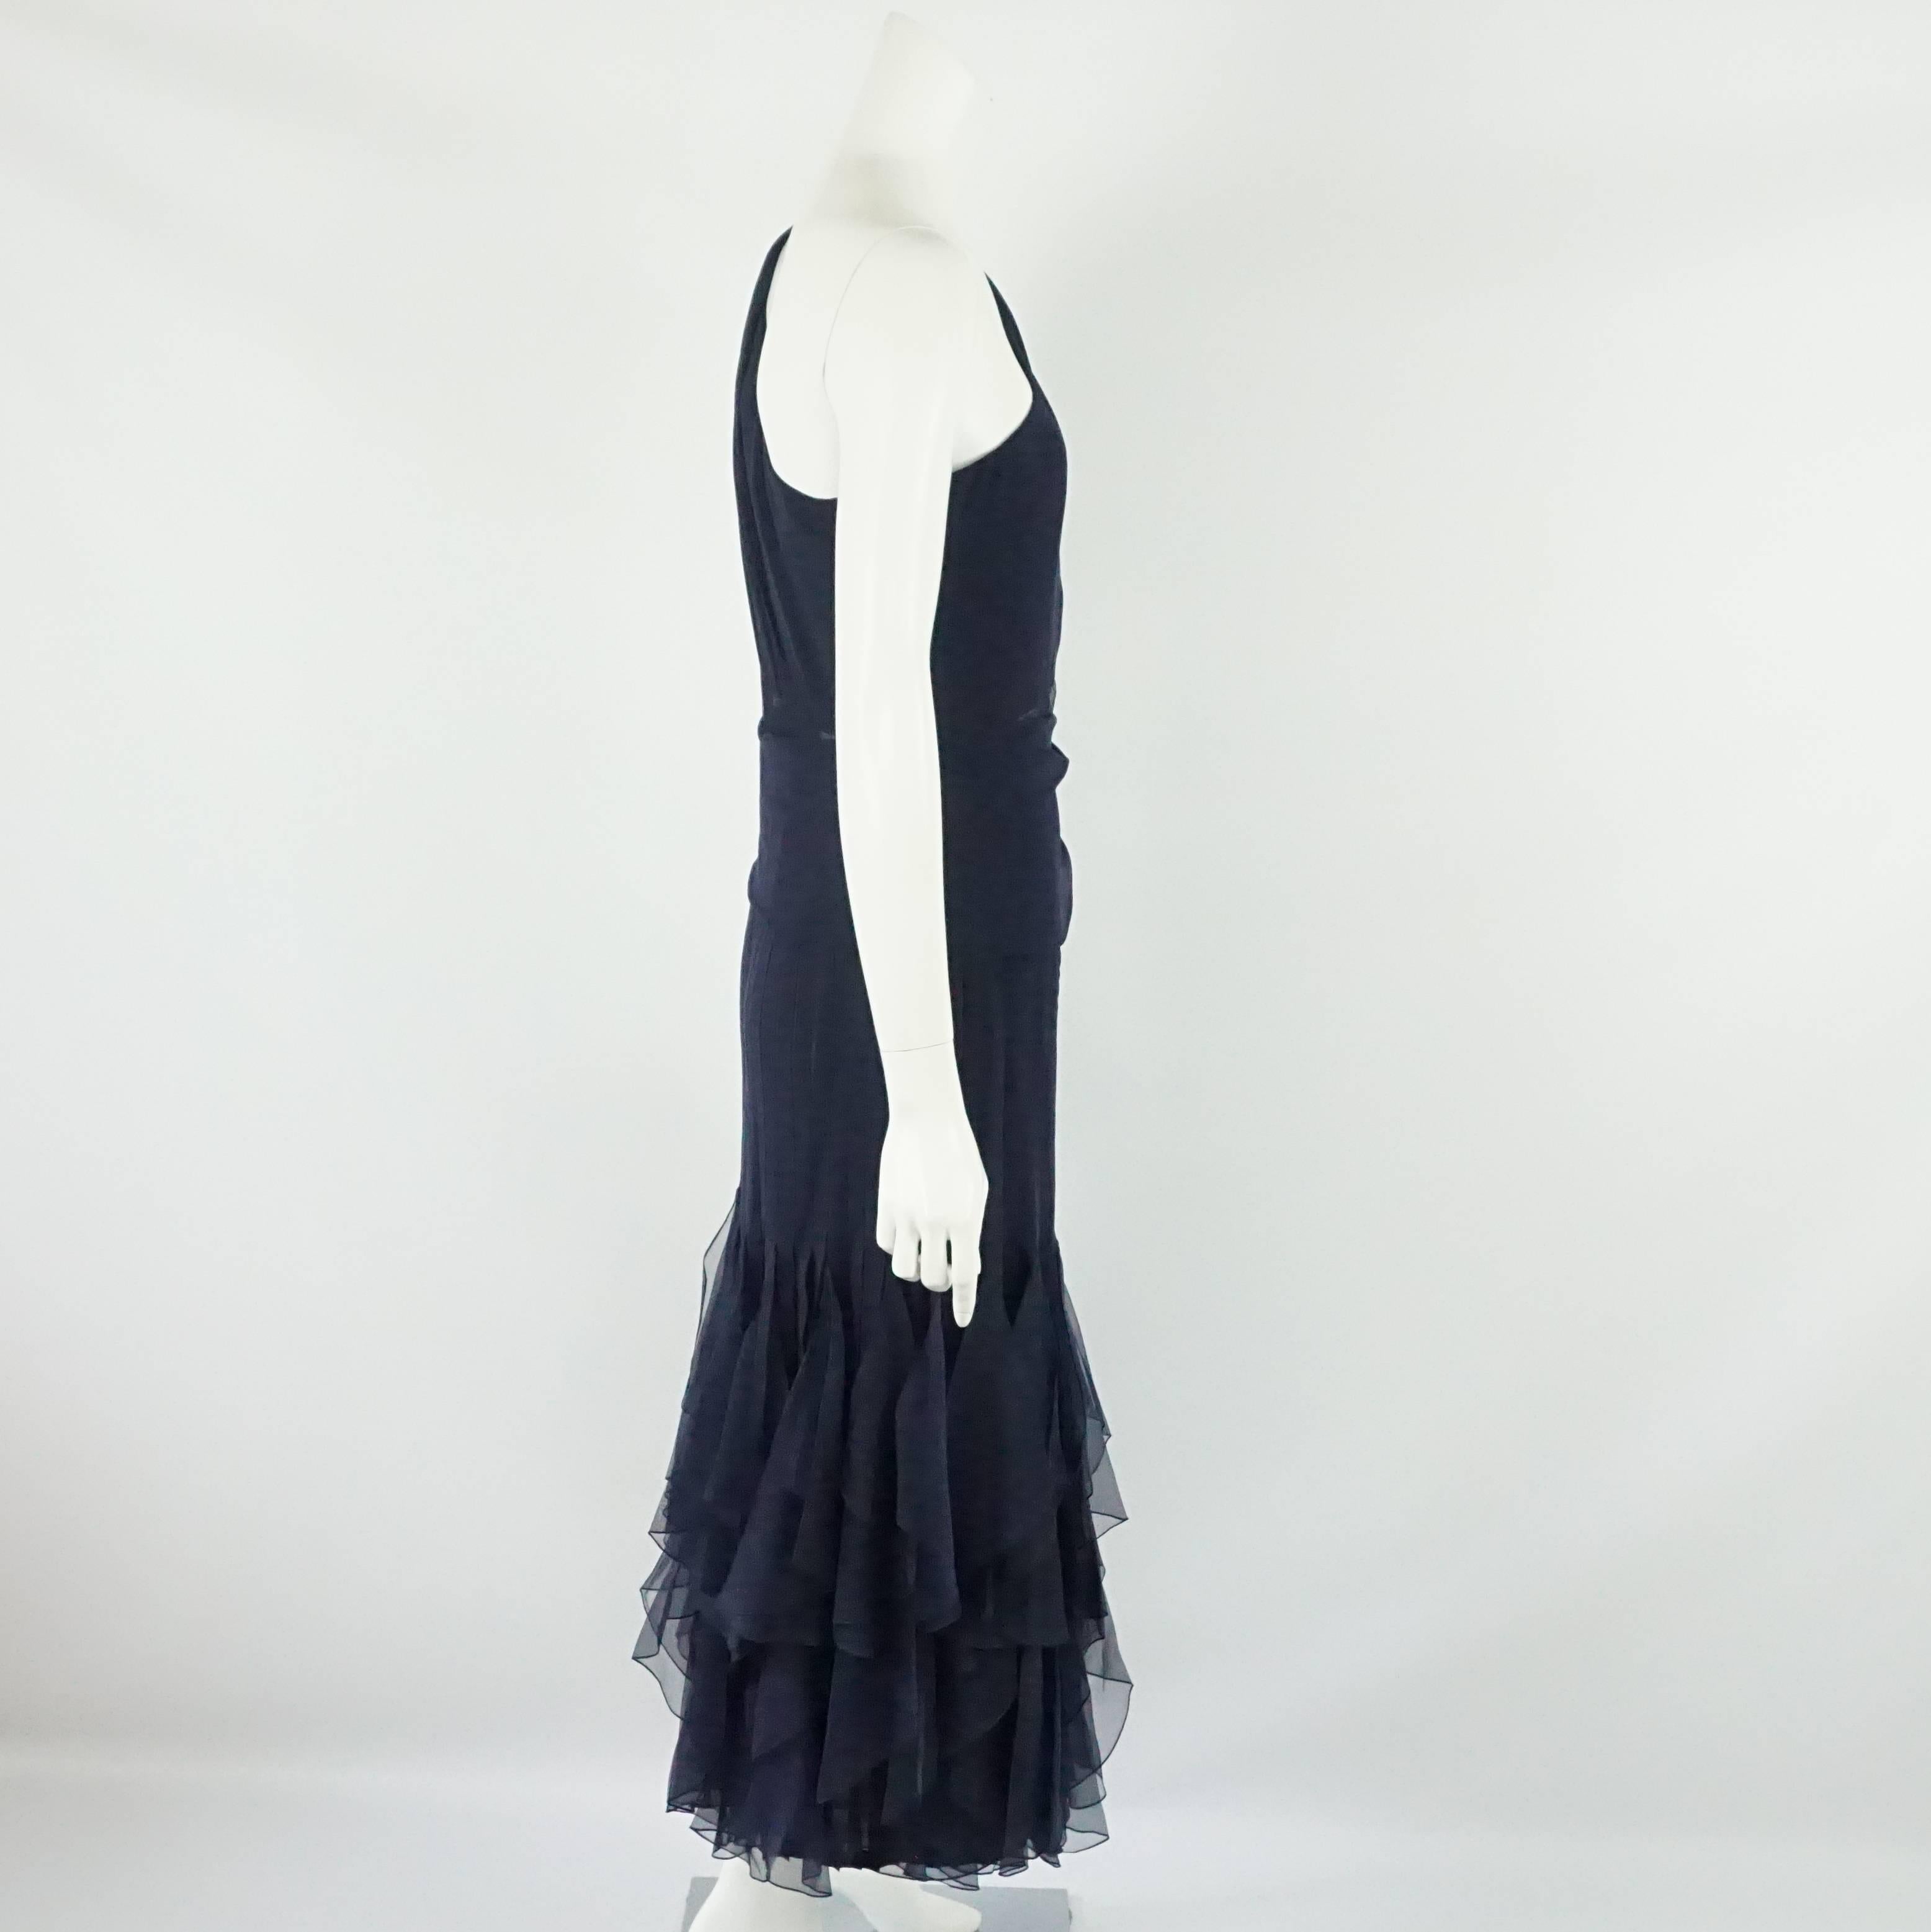 Valentino Boutique Navy Silk Chiffon One Shoulder Gown - 12 - 90's This gown has a mid section that is sheer and the bottom has teardrop silk chiffon vertical ruffles. This is a timeless piece and is in excellent vintage